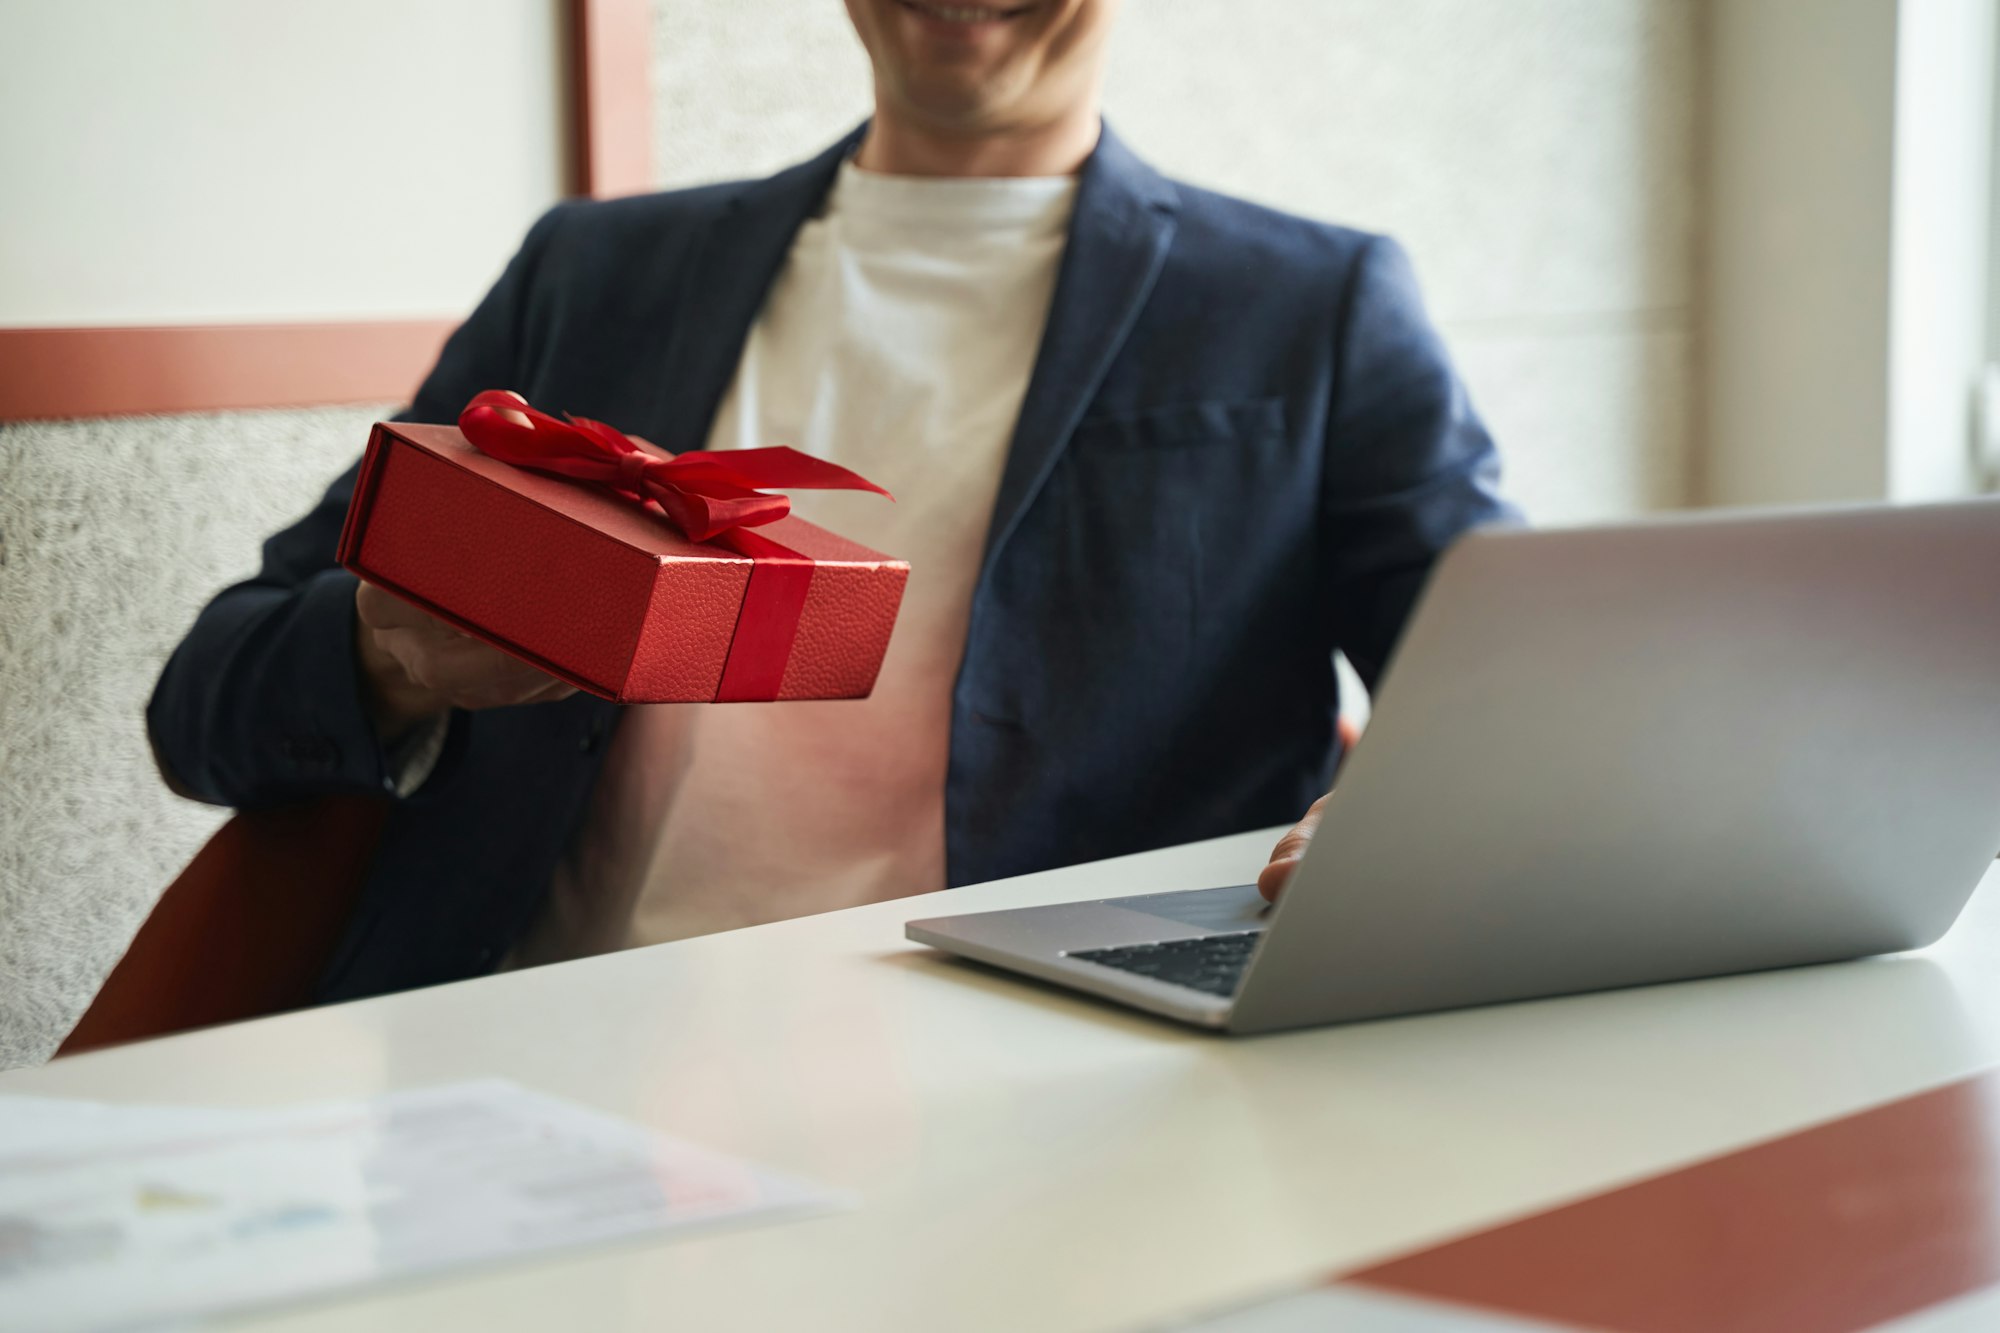 Red giftbox in hand of businessman before laptop